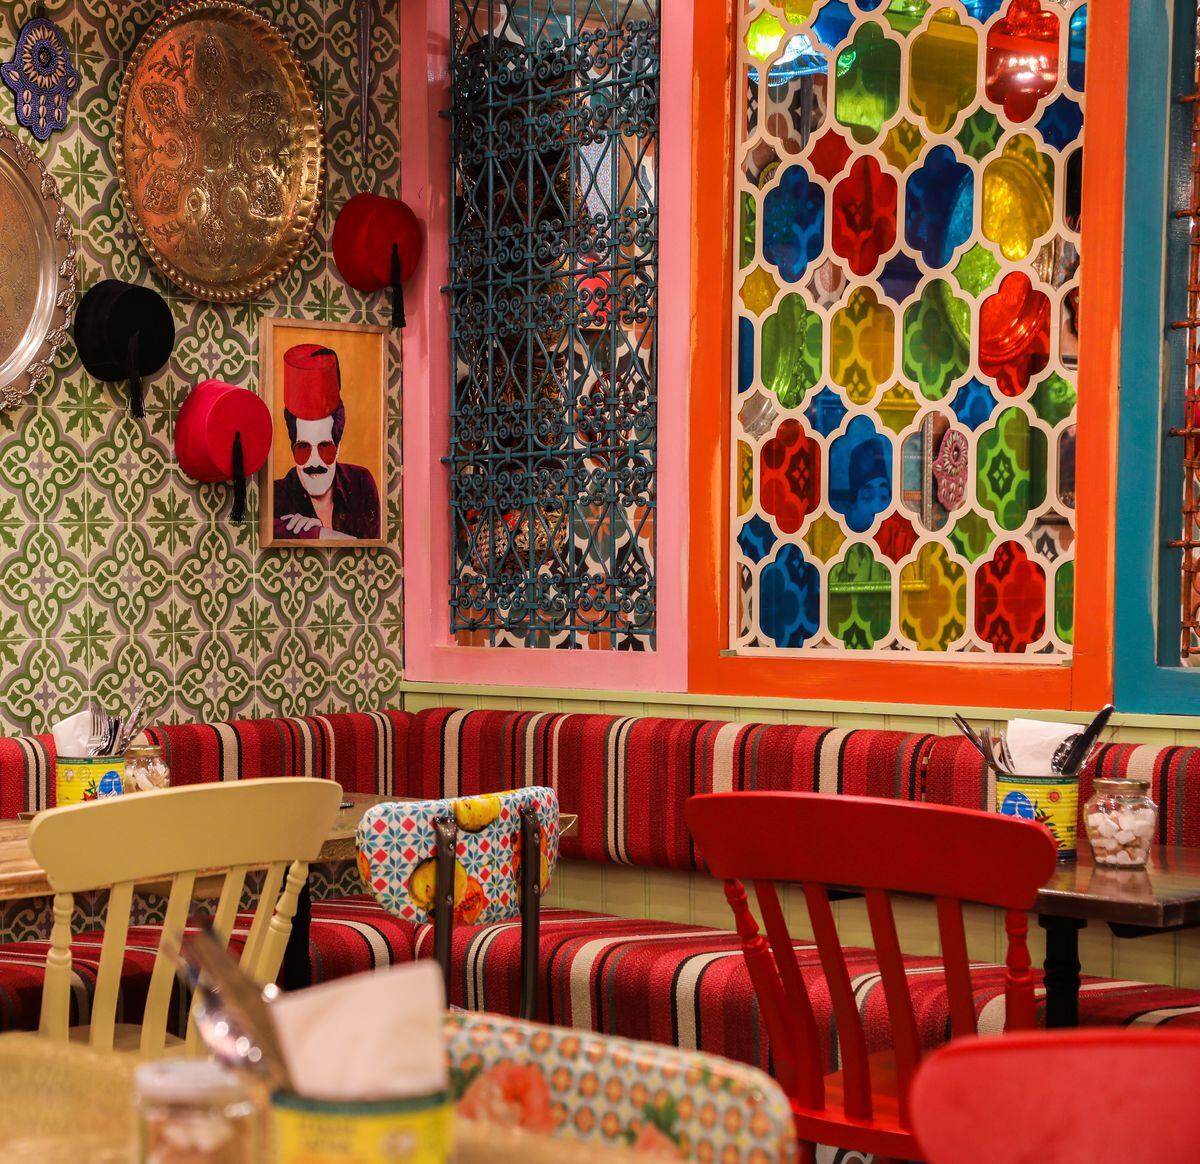 A riot of colour – the authentic interior